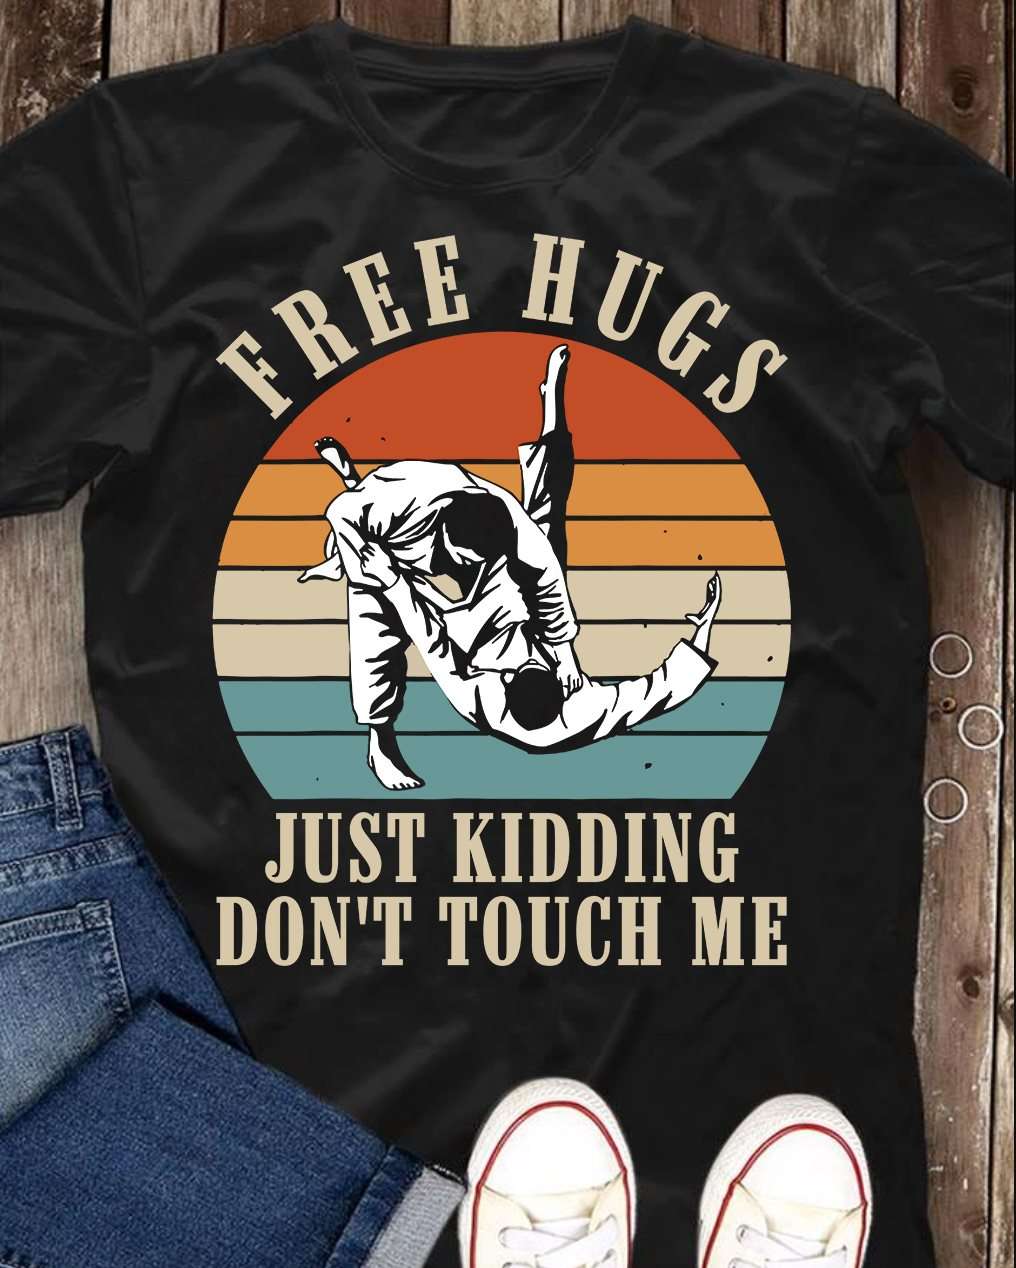 Free hugs, just kidding don't touch me - Judo training